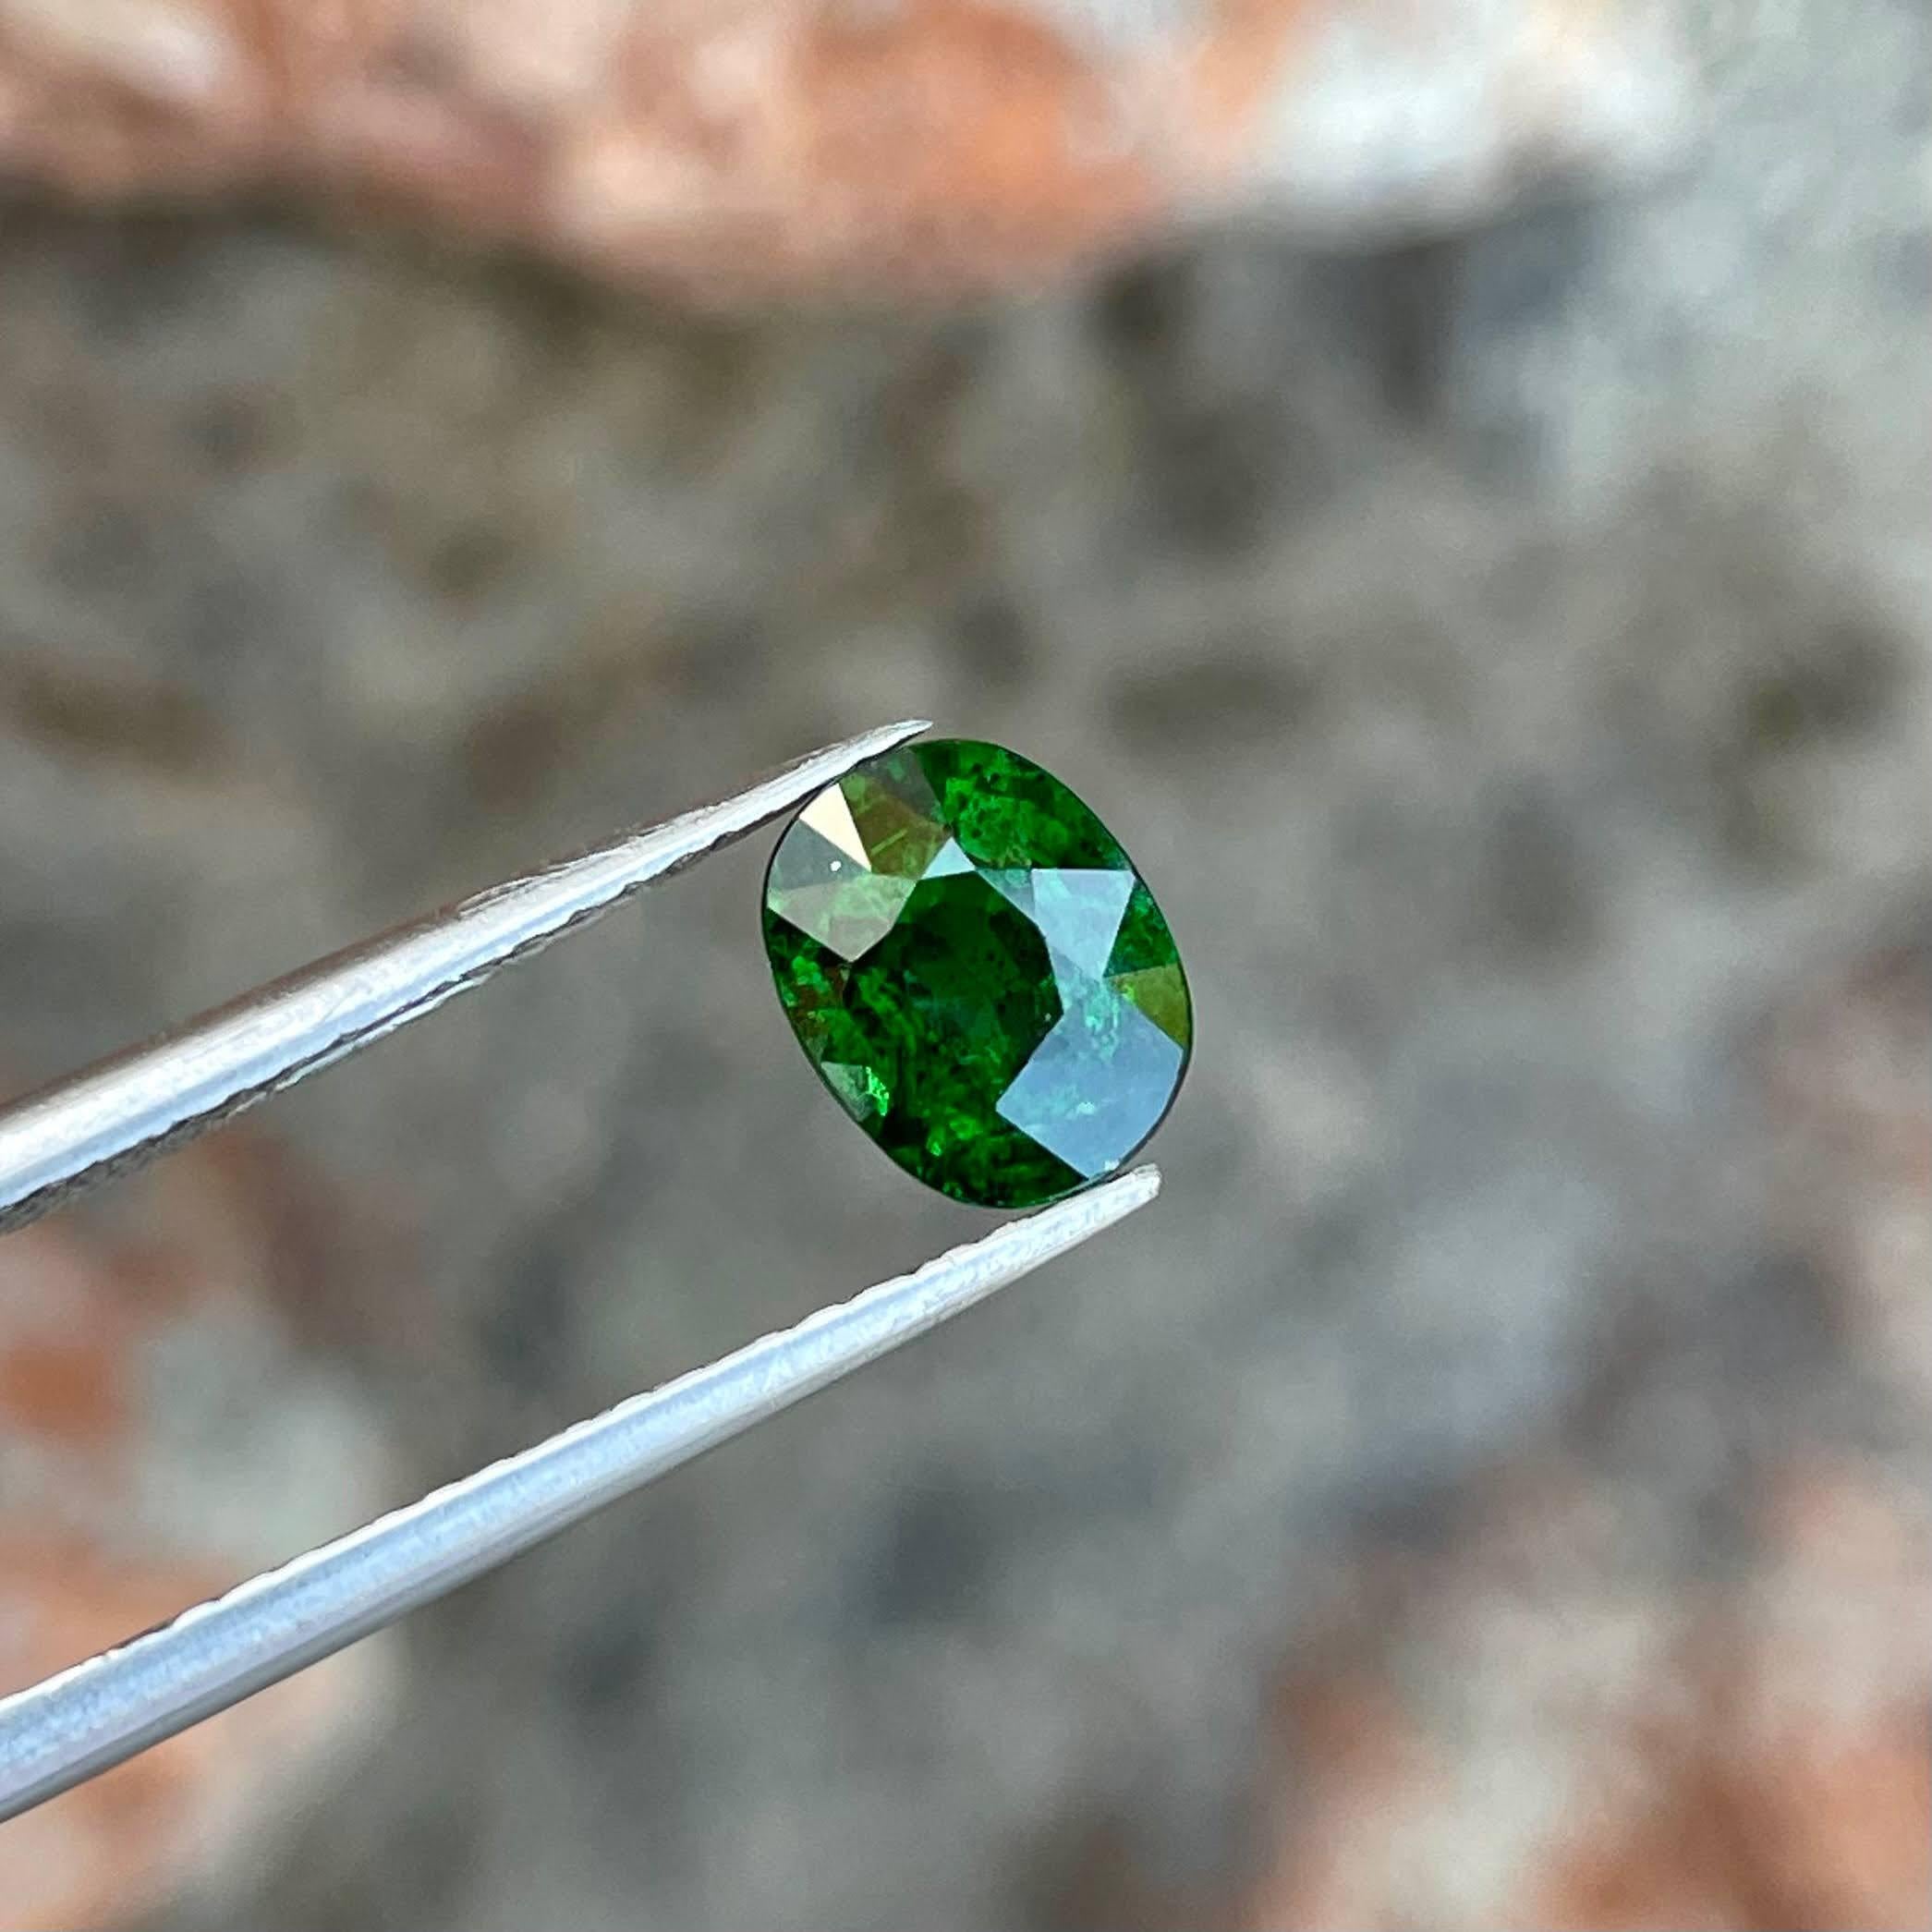 Weight 1.45 carats 
Dimensions 7.05x5.59x4.28 mm
Treatment none 
Origin Kenya 
Clarity VVS
Shape oval 
Cut Oval 




Discover the unparalleled beauty of this exquisite 1.45 carats Rich Green Tsavorite Garnet, boasting a captivating Oval Cut that